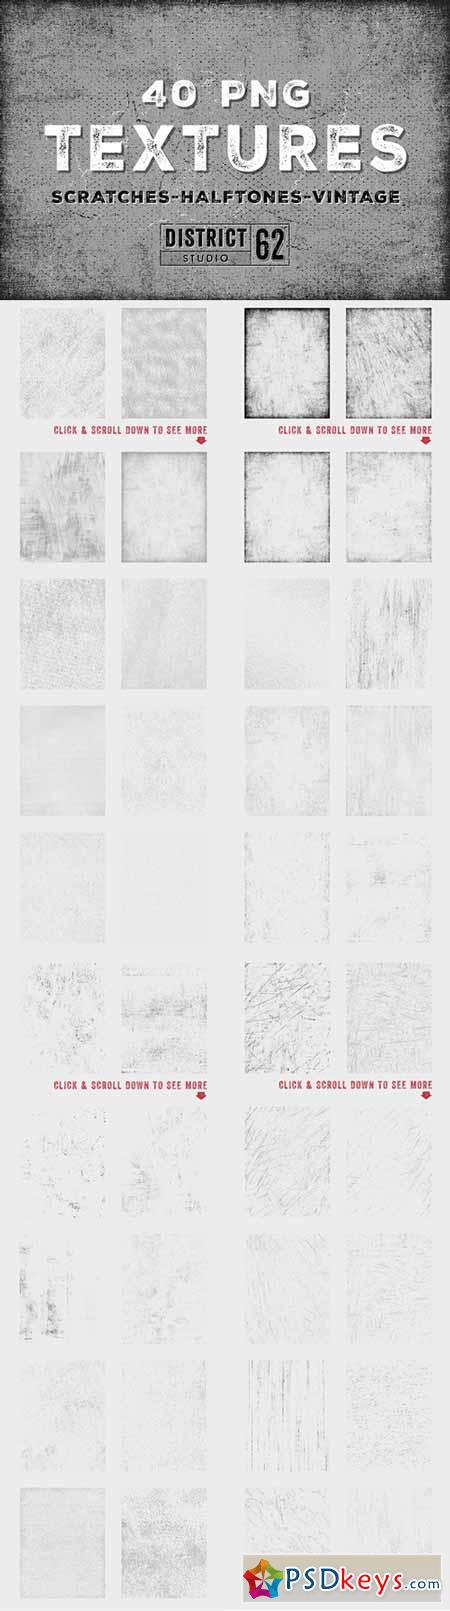 40 Awesome PNG Textures - 376550